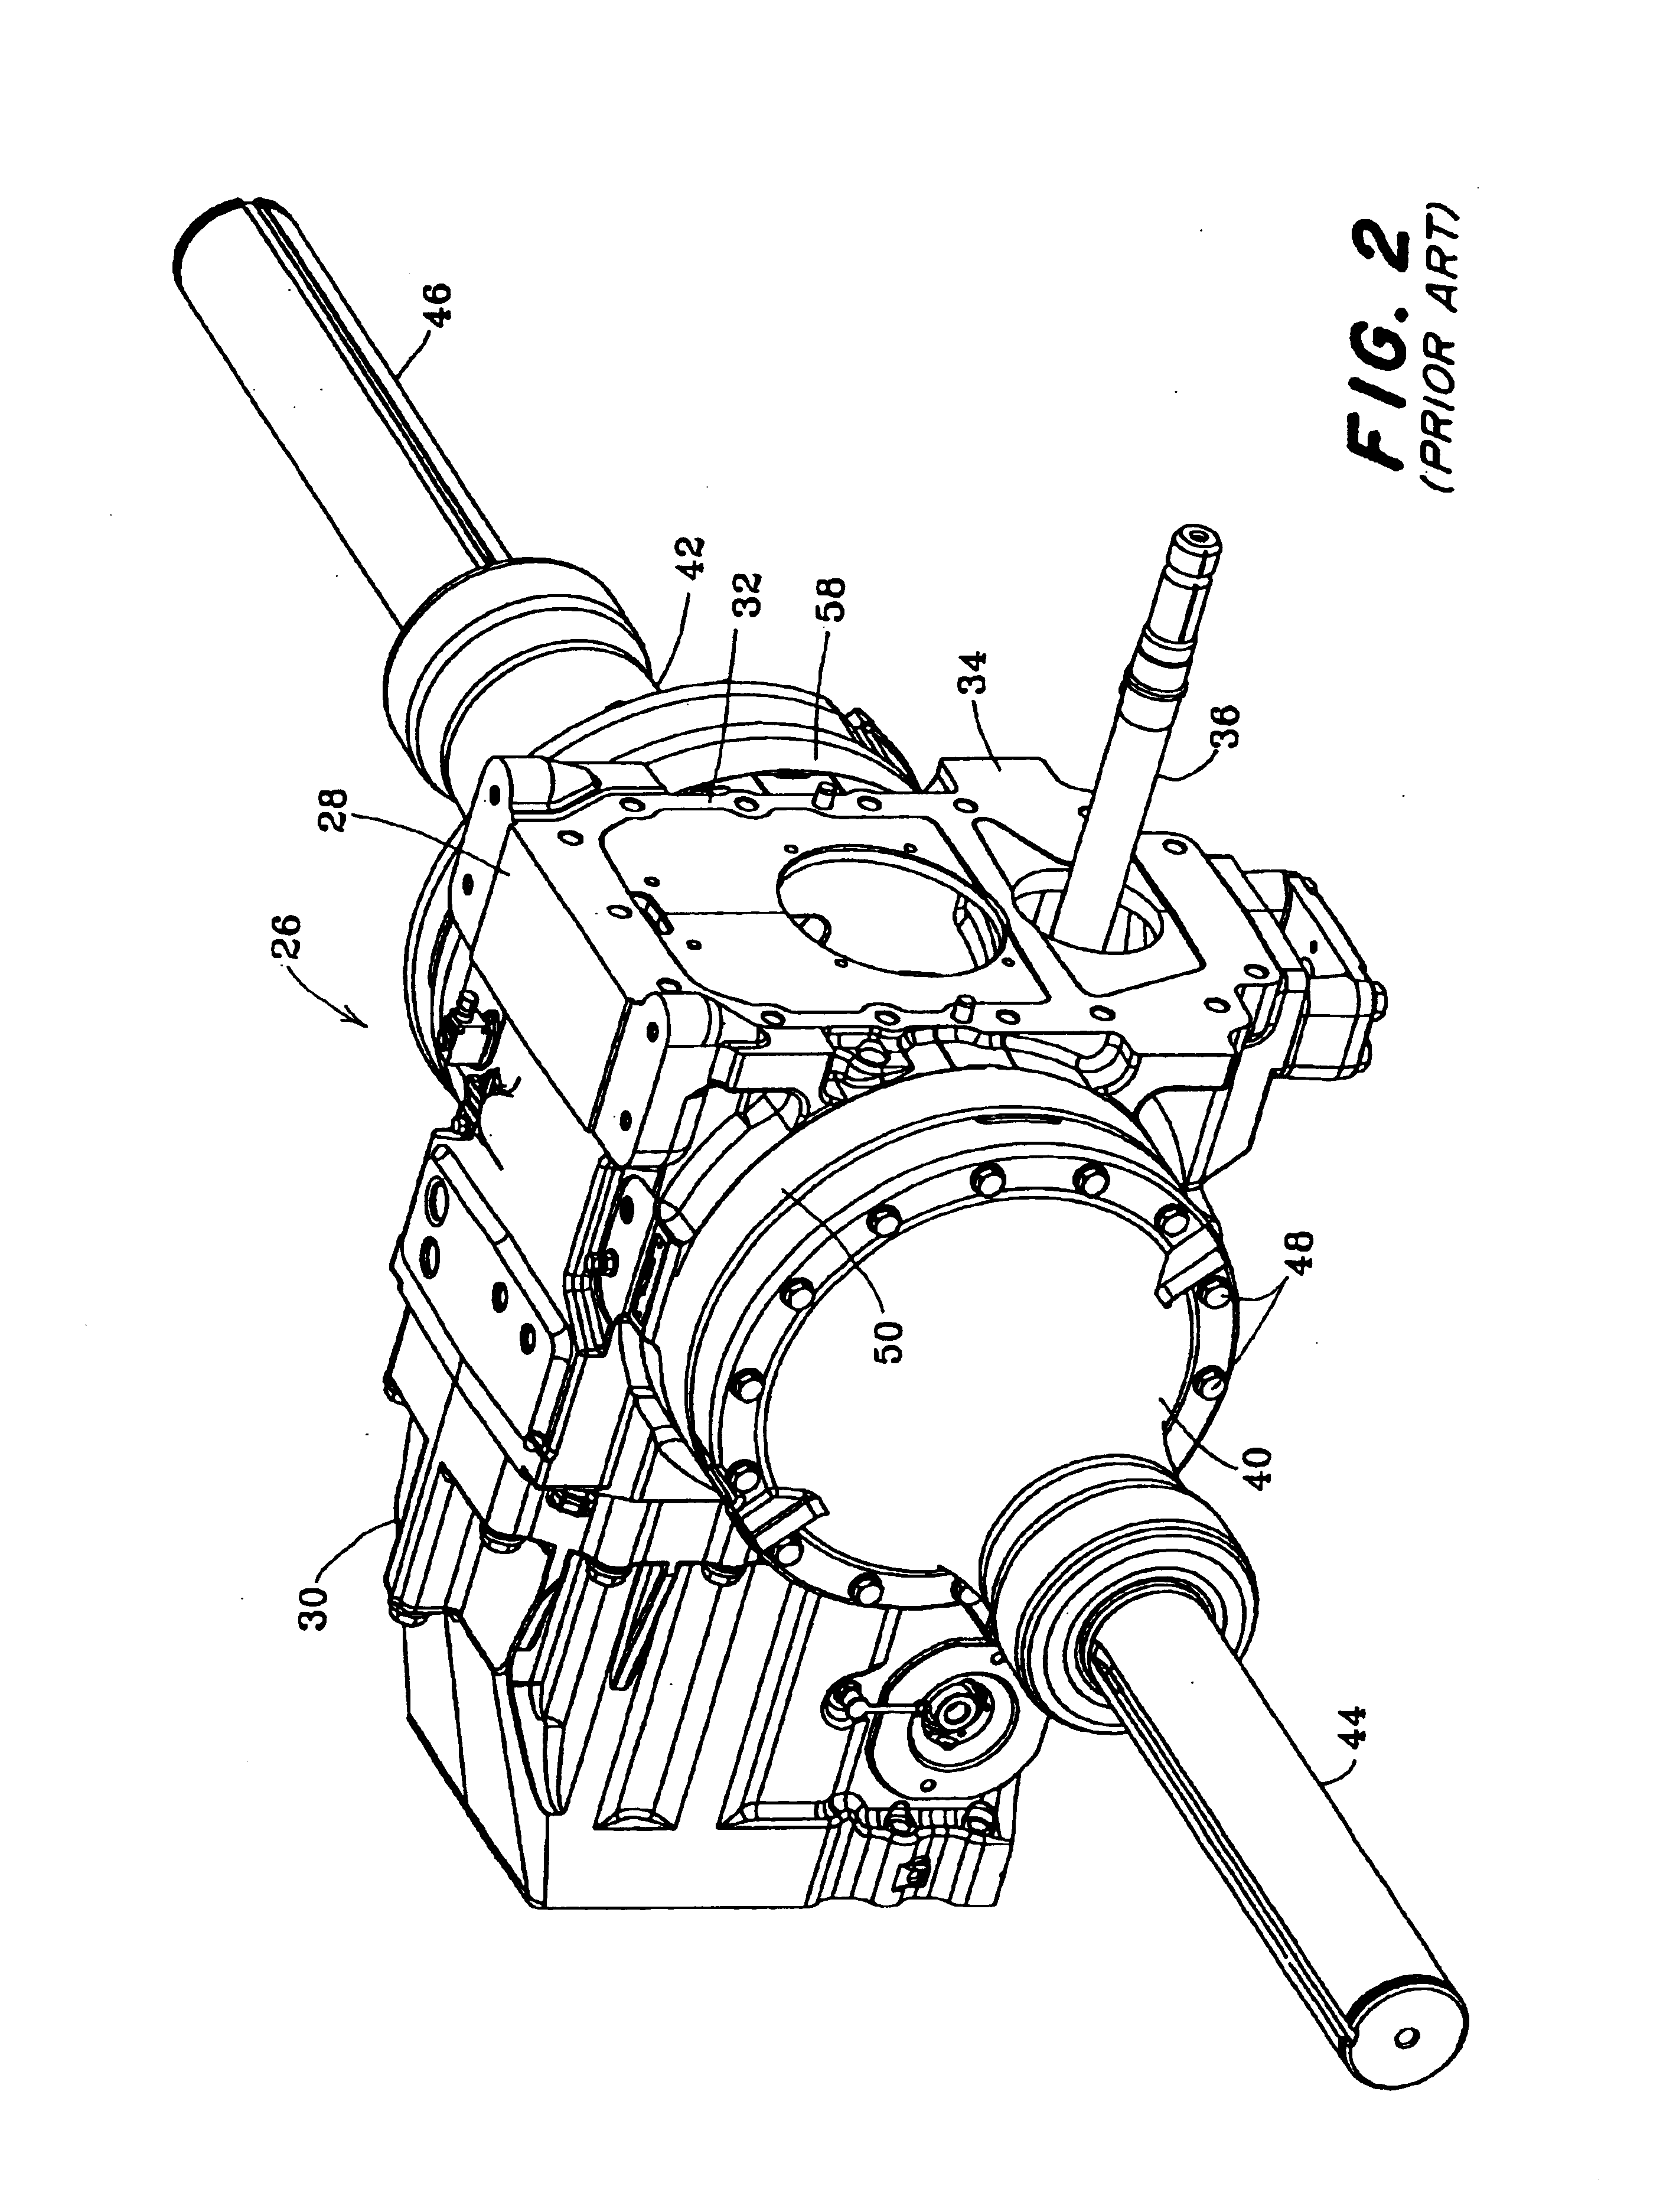 Suspended drive axle and agricultural tractor with same